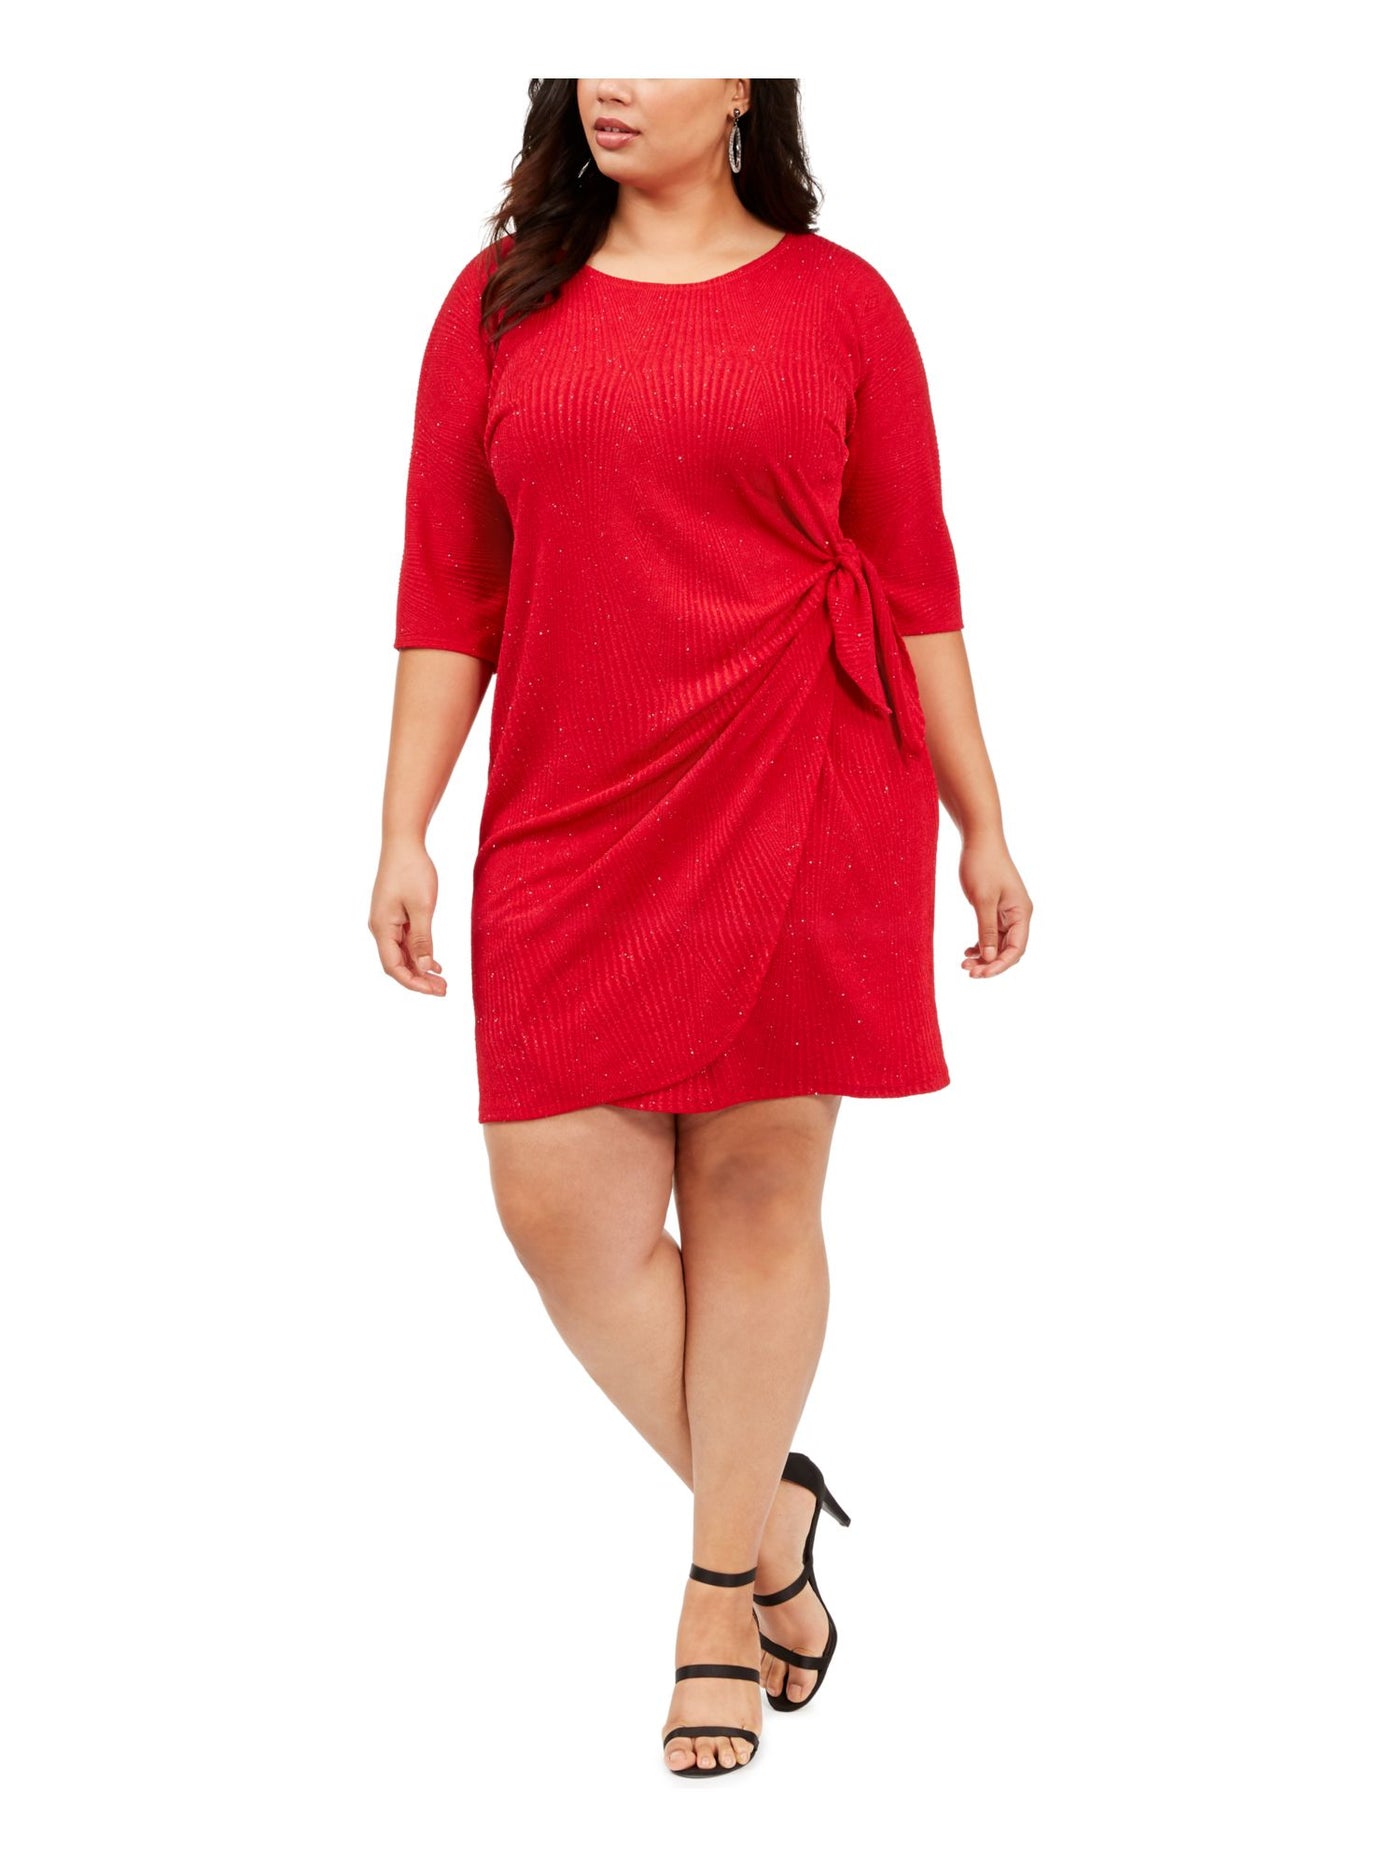 SIGNATURE BY ROBBIE BEE Womens Red 3/4 Sleeve Jewel Neck Above The Knee Party Sheath Dress Plus 2X